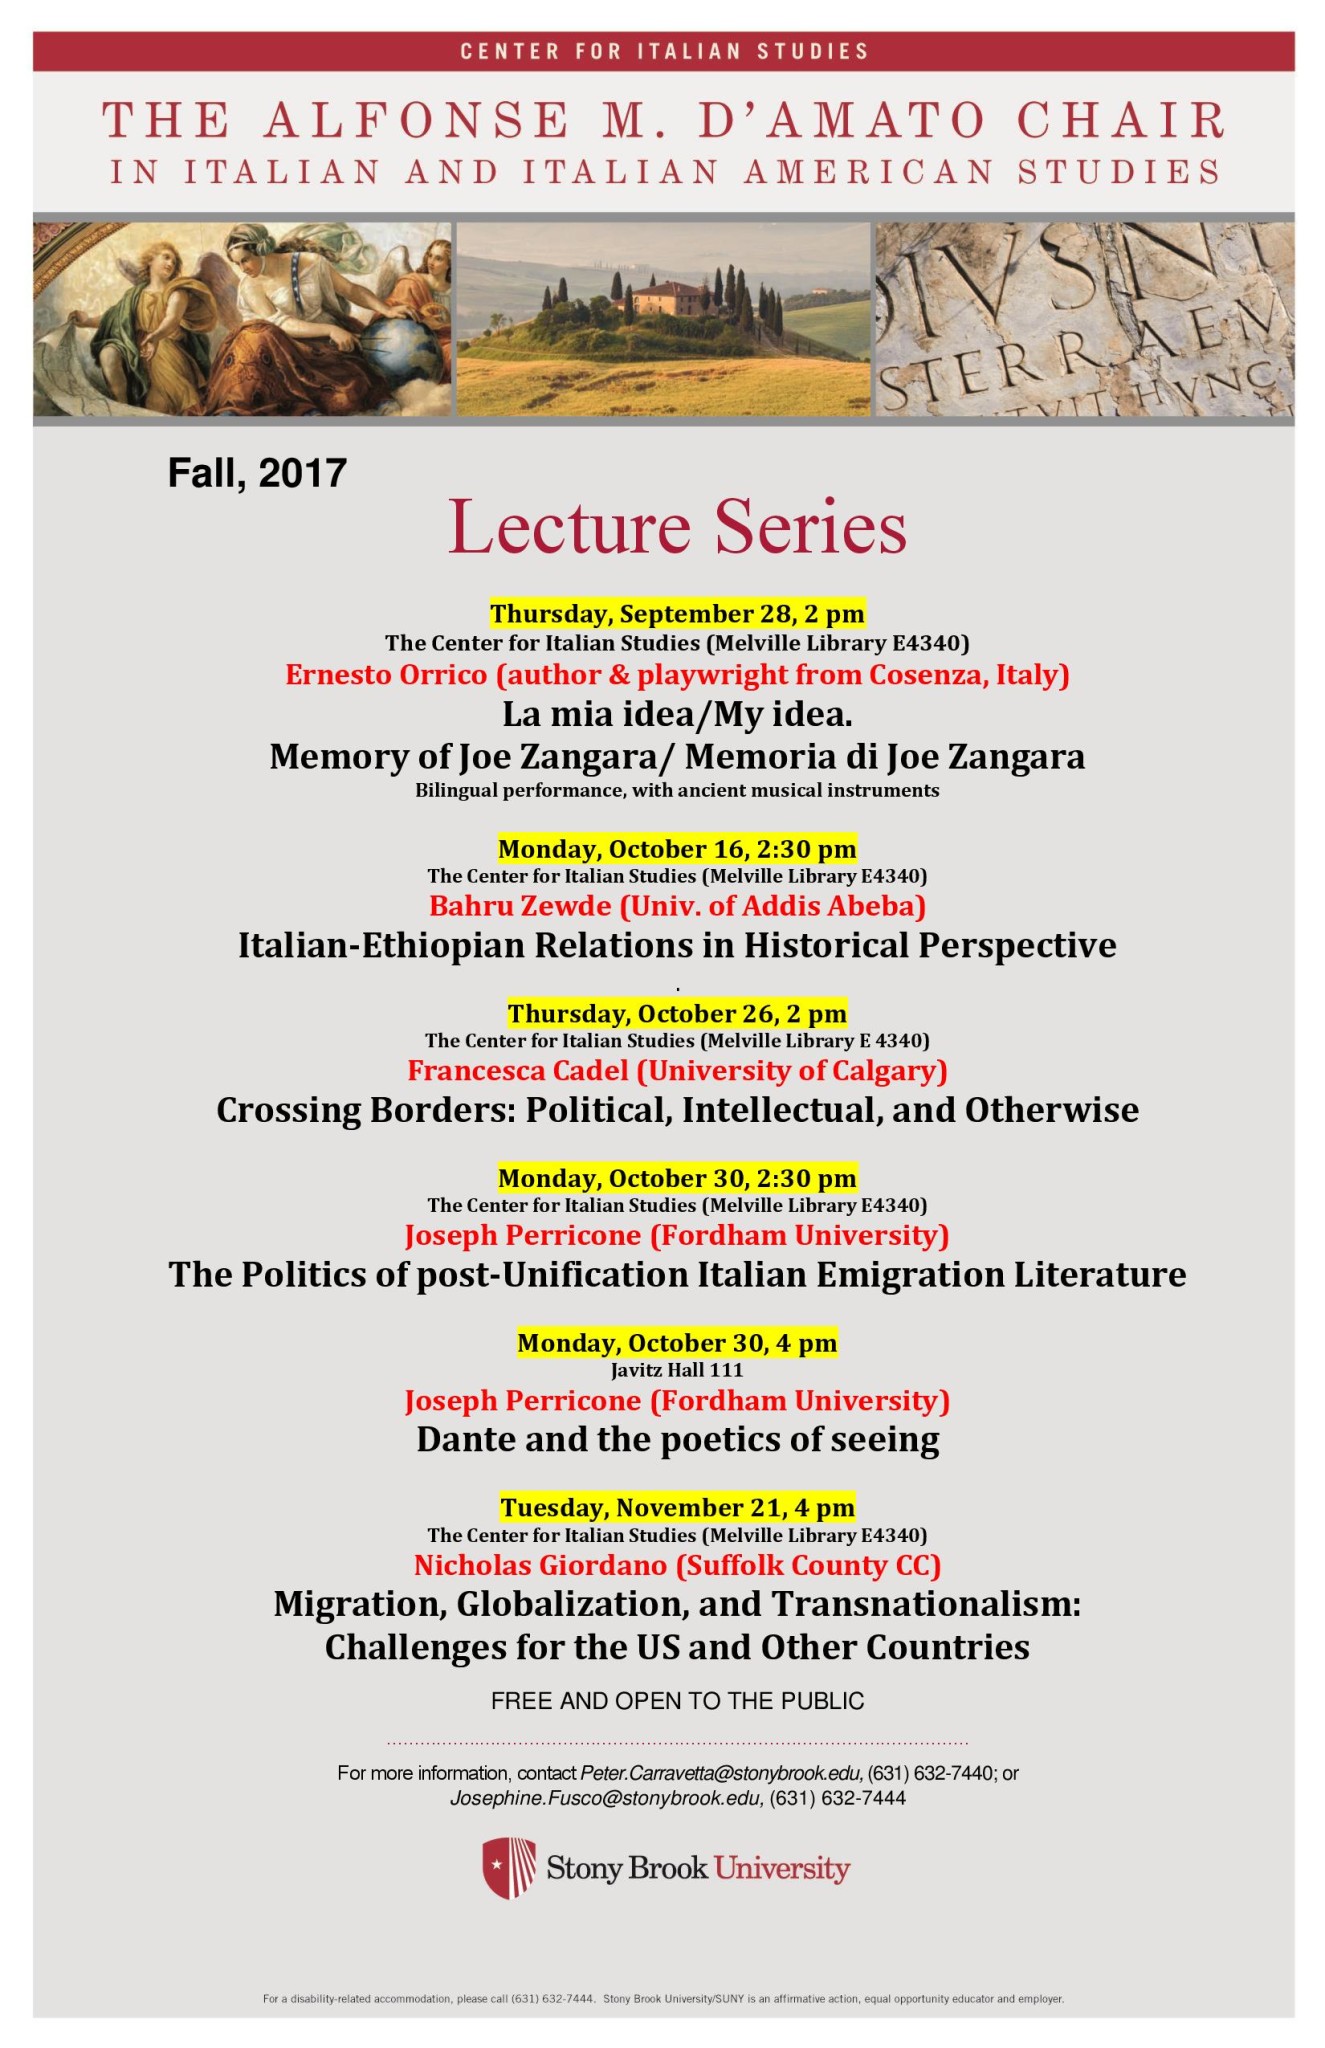 Fall 2017_D Amato Chair Lecture Series Fall 2017-page-001